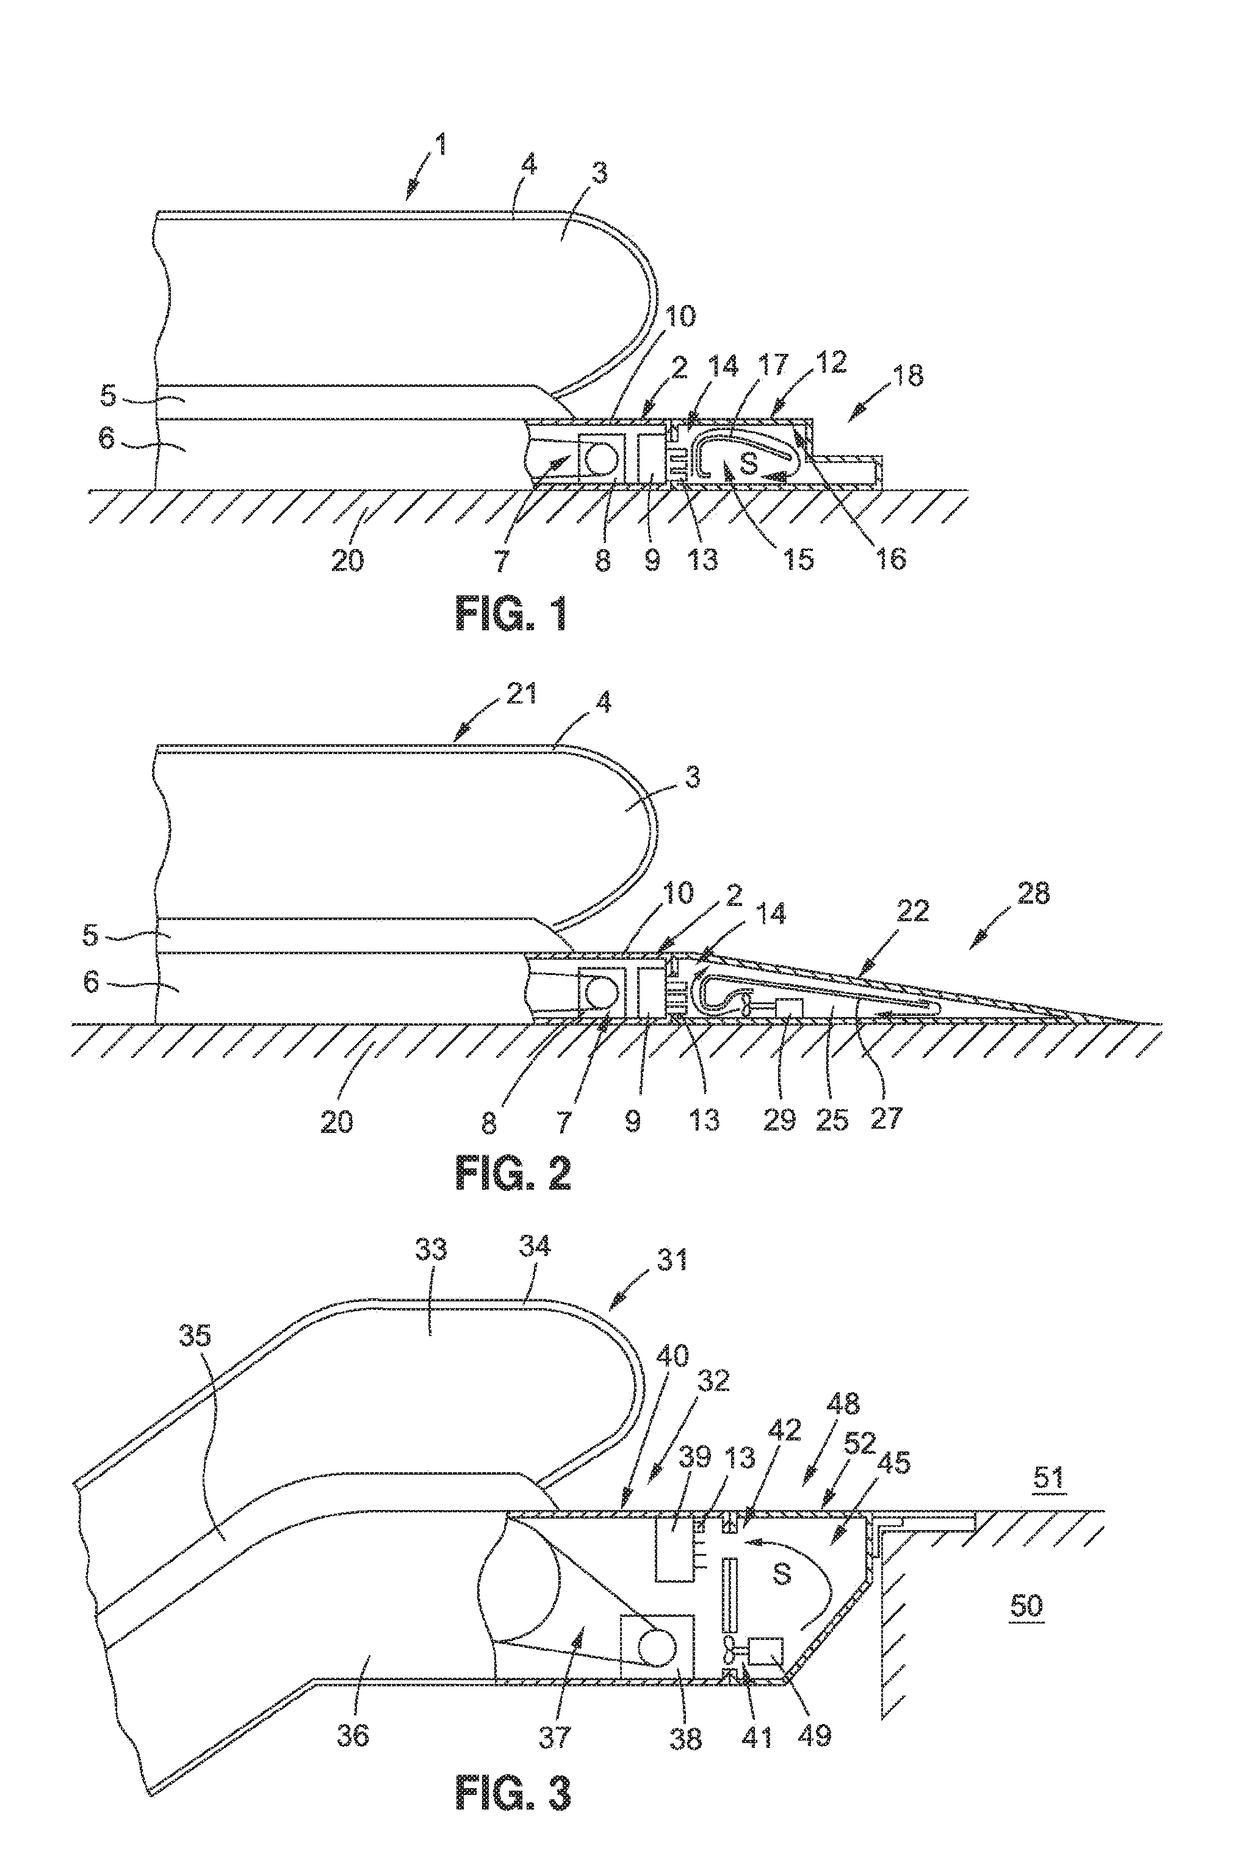 Escalator or moving walkway with at least one access module